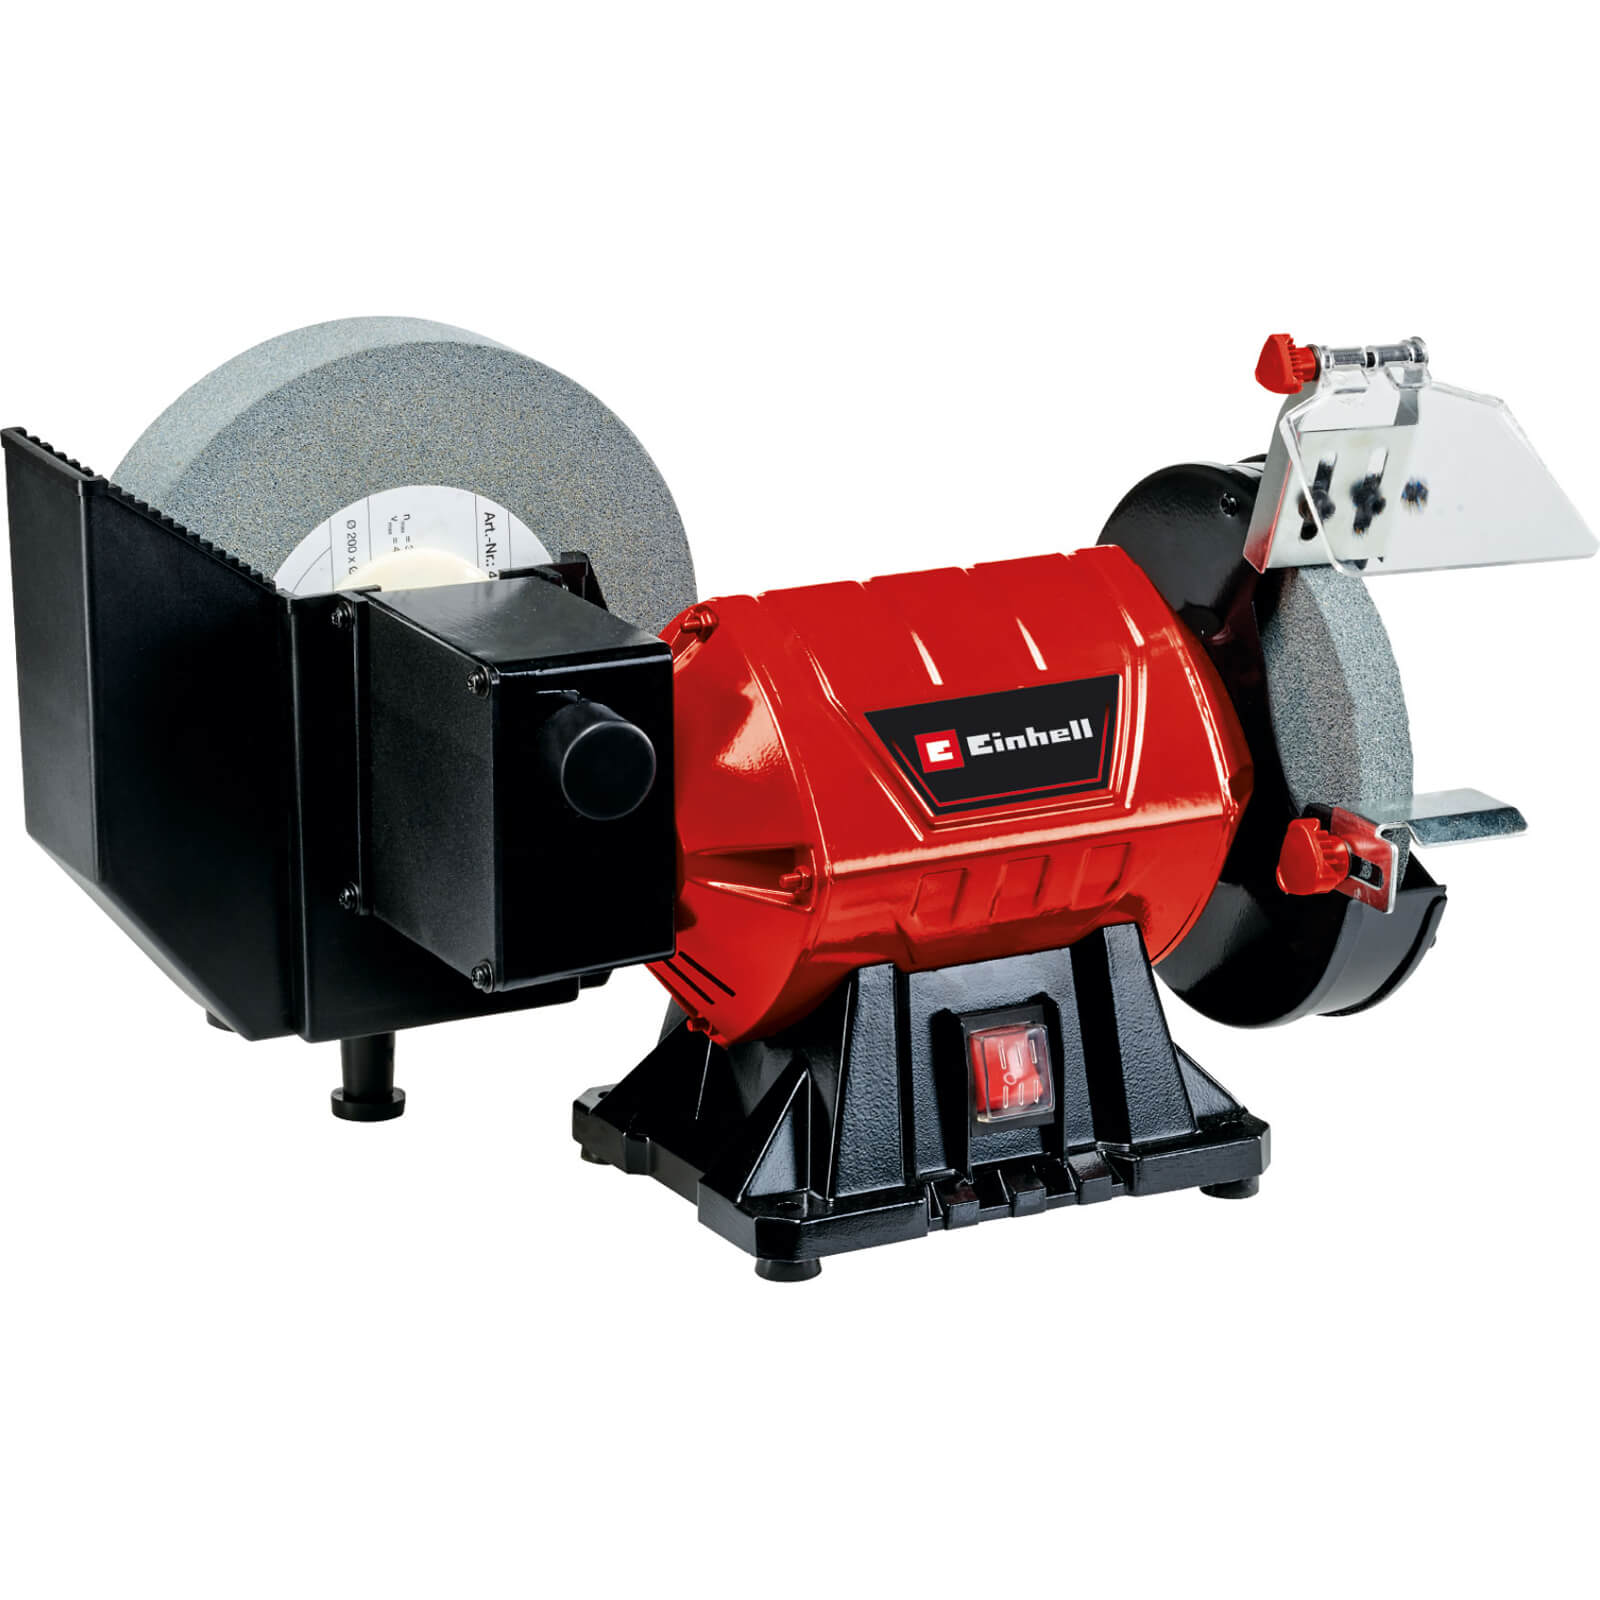 Image of Einhell TC-WD 200/150 Wet and Dry Bench Grinder 200mm / 150mm